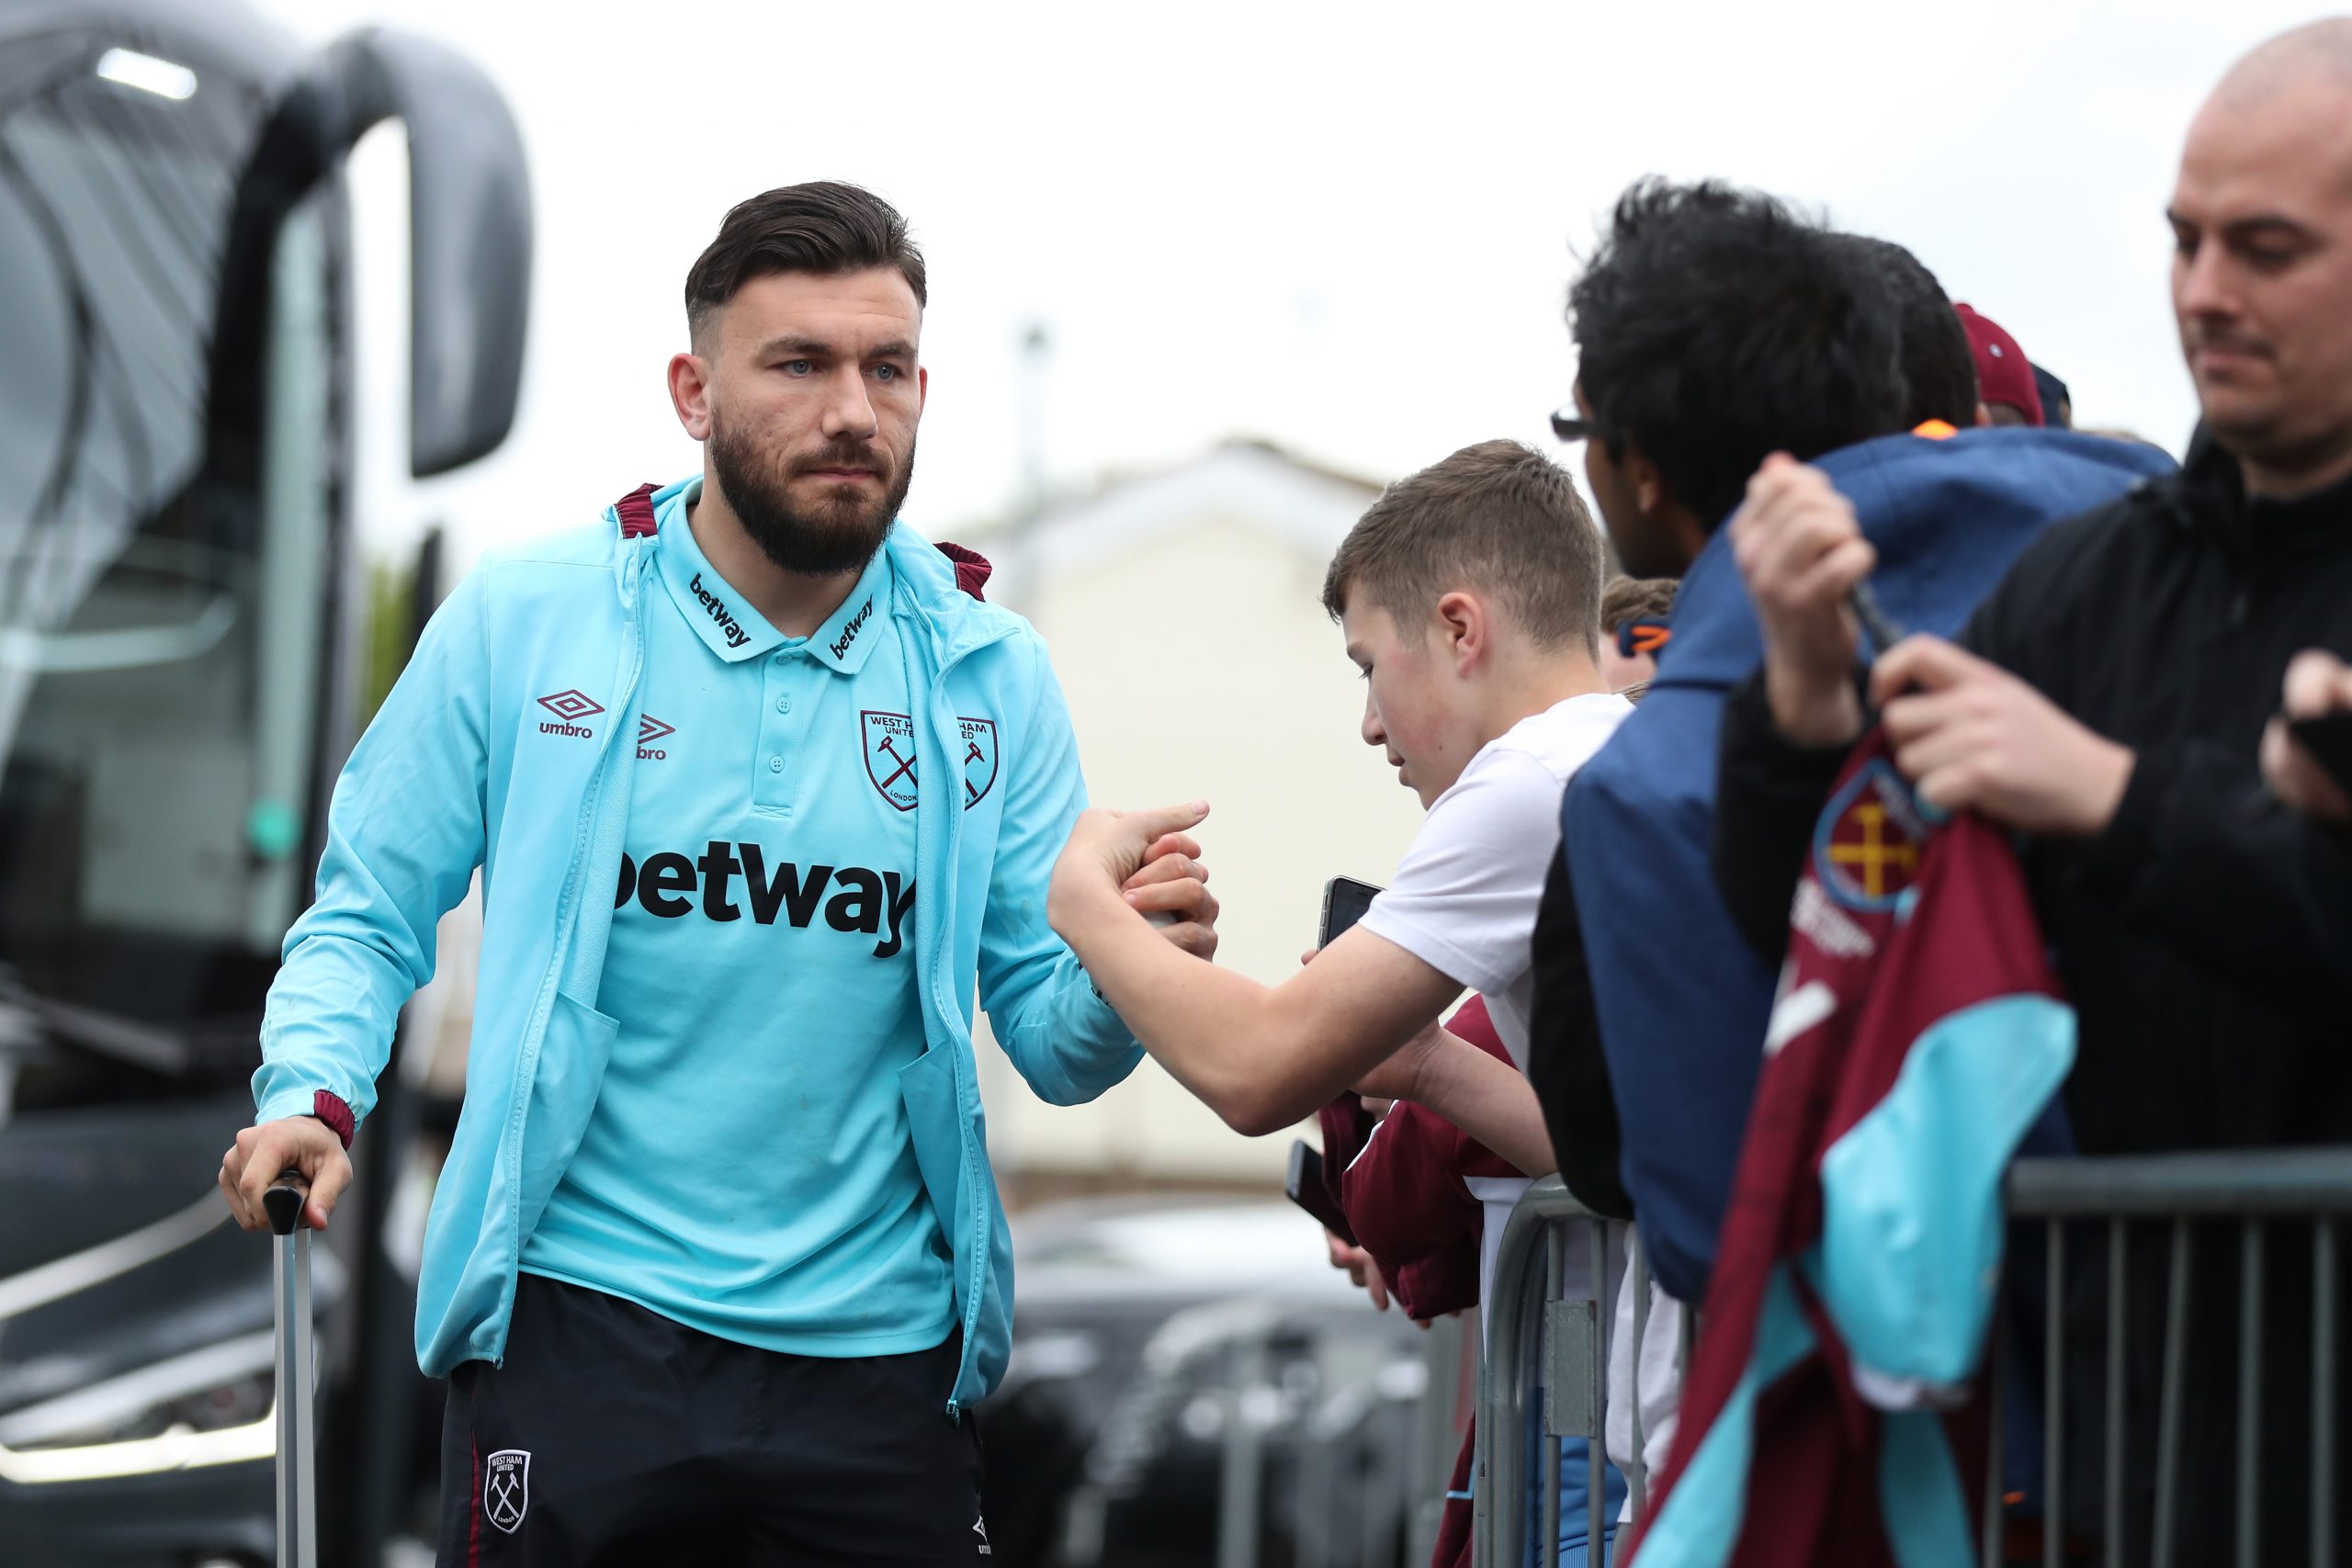 West Ham United hoping to offload Robert Snodgrass who is seen in the picture